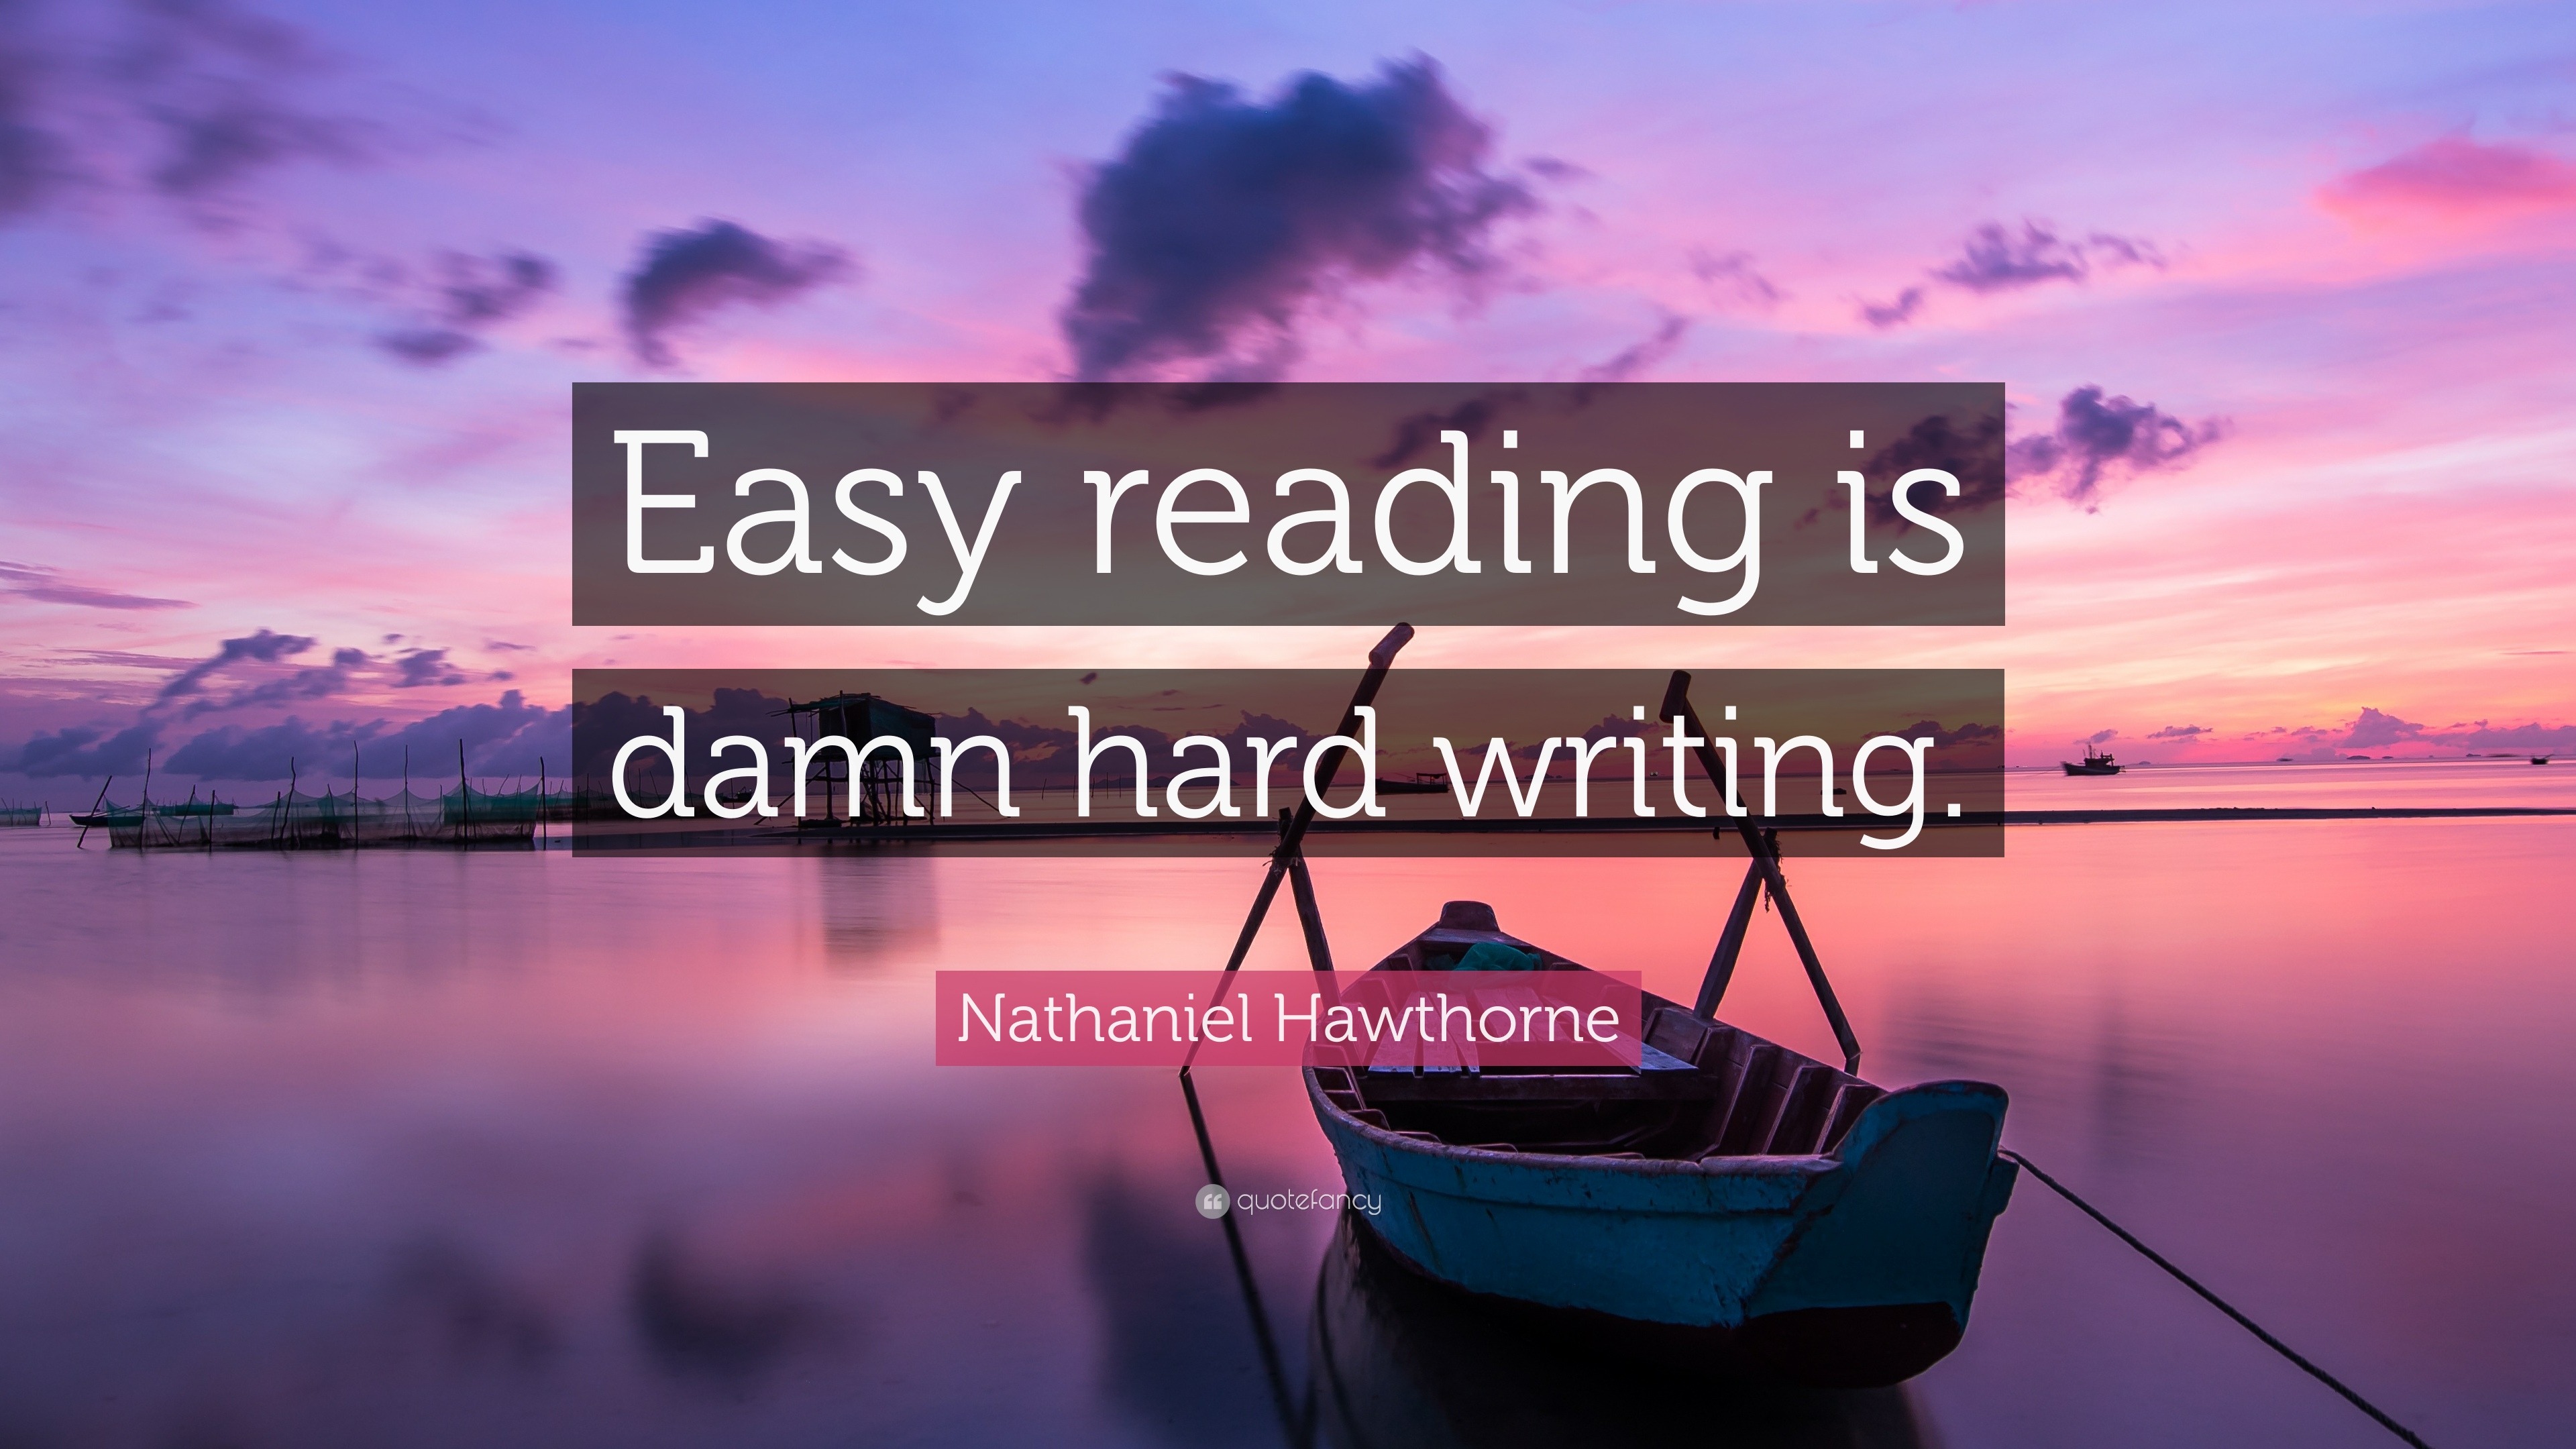 easy reading is damn hard writing meaning